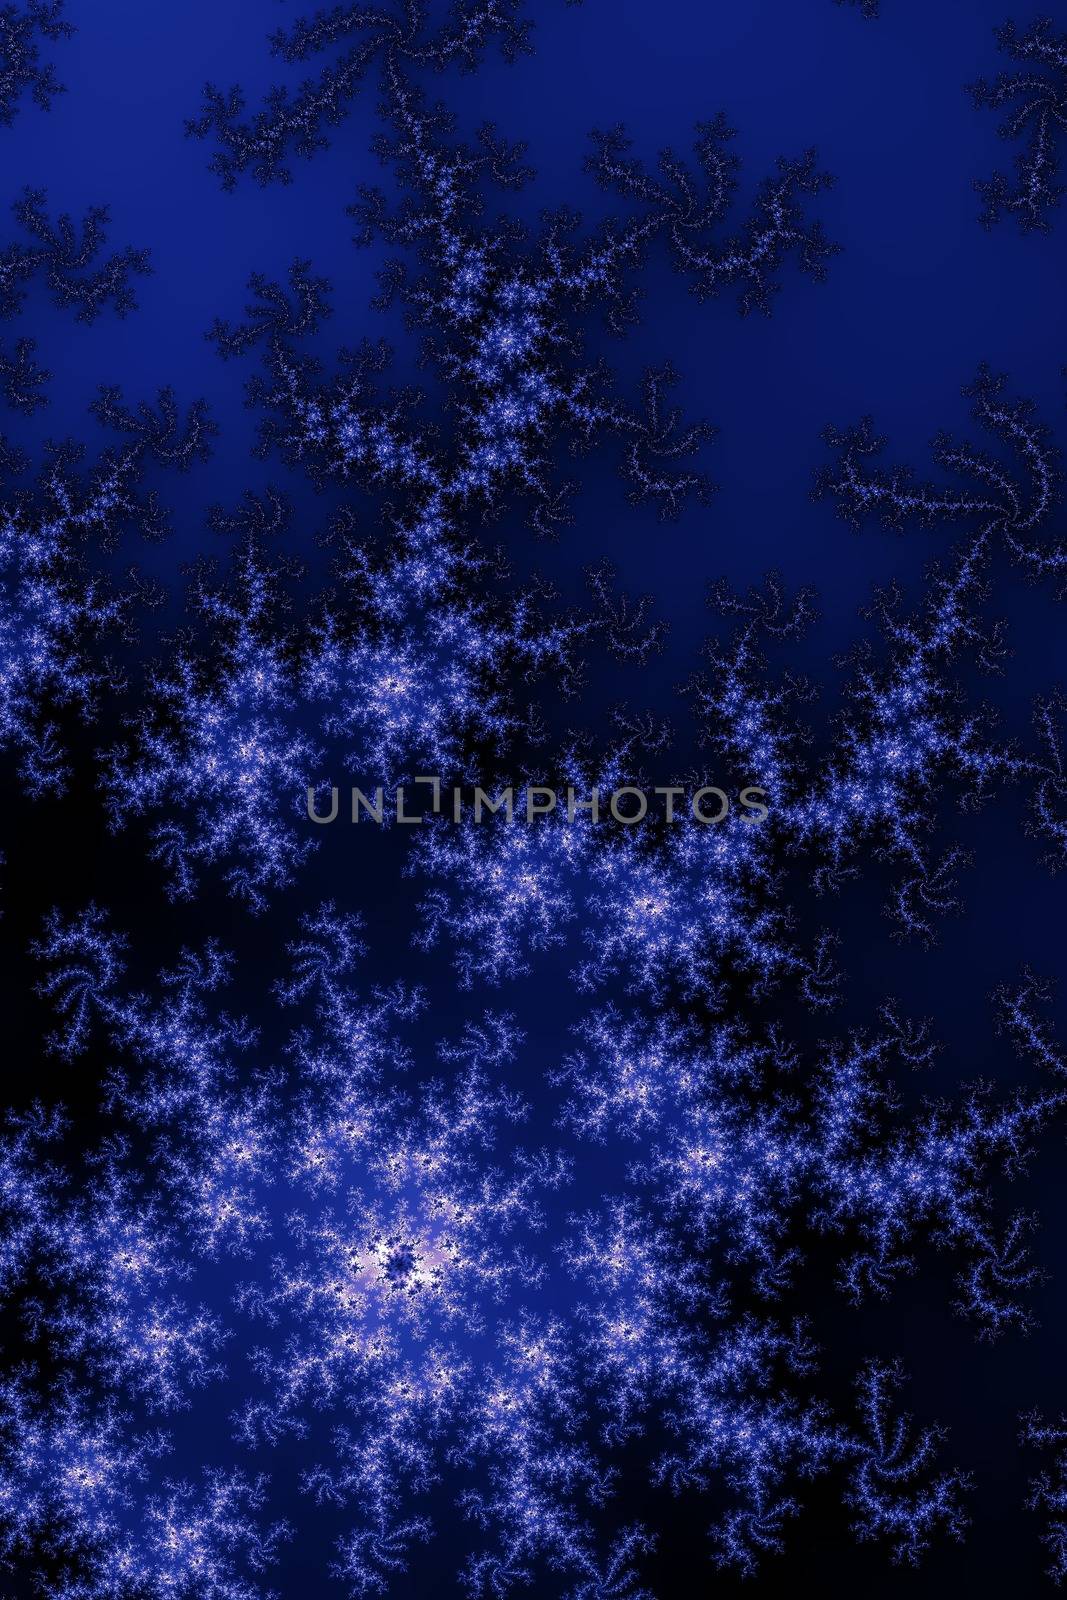 Fractal background in the different shades of dark blue.